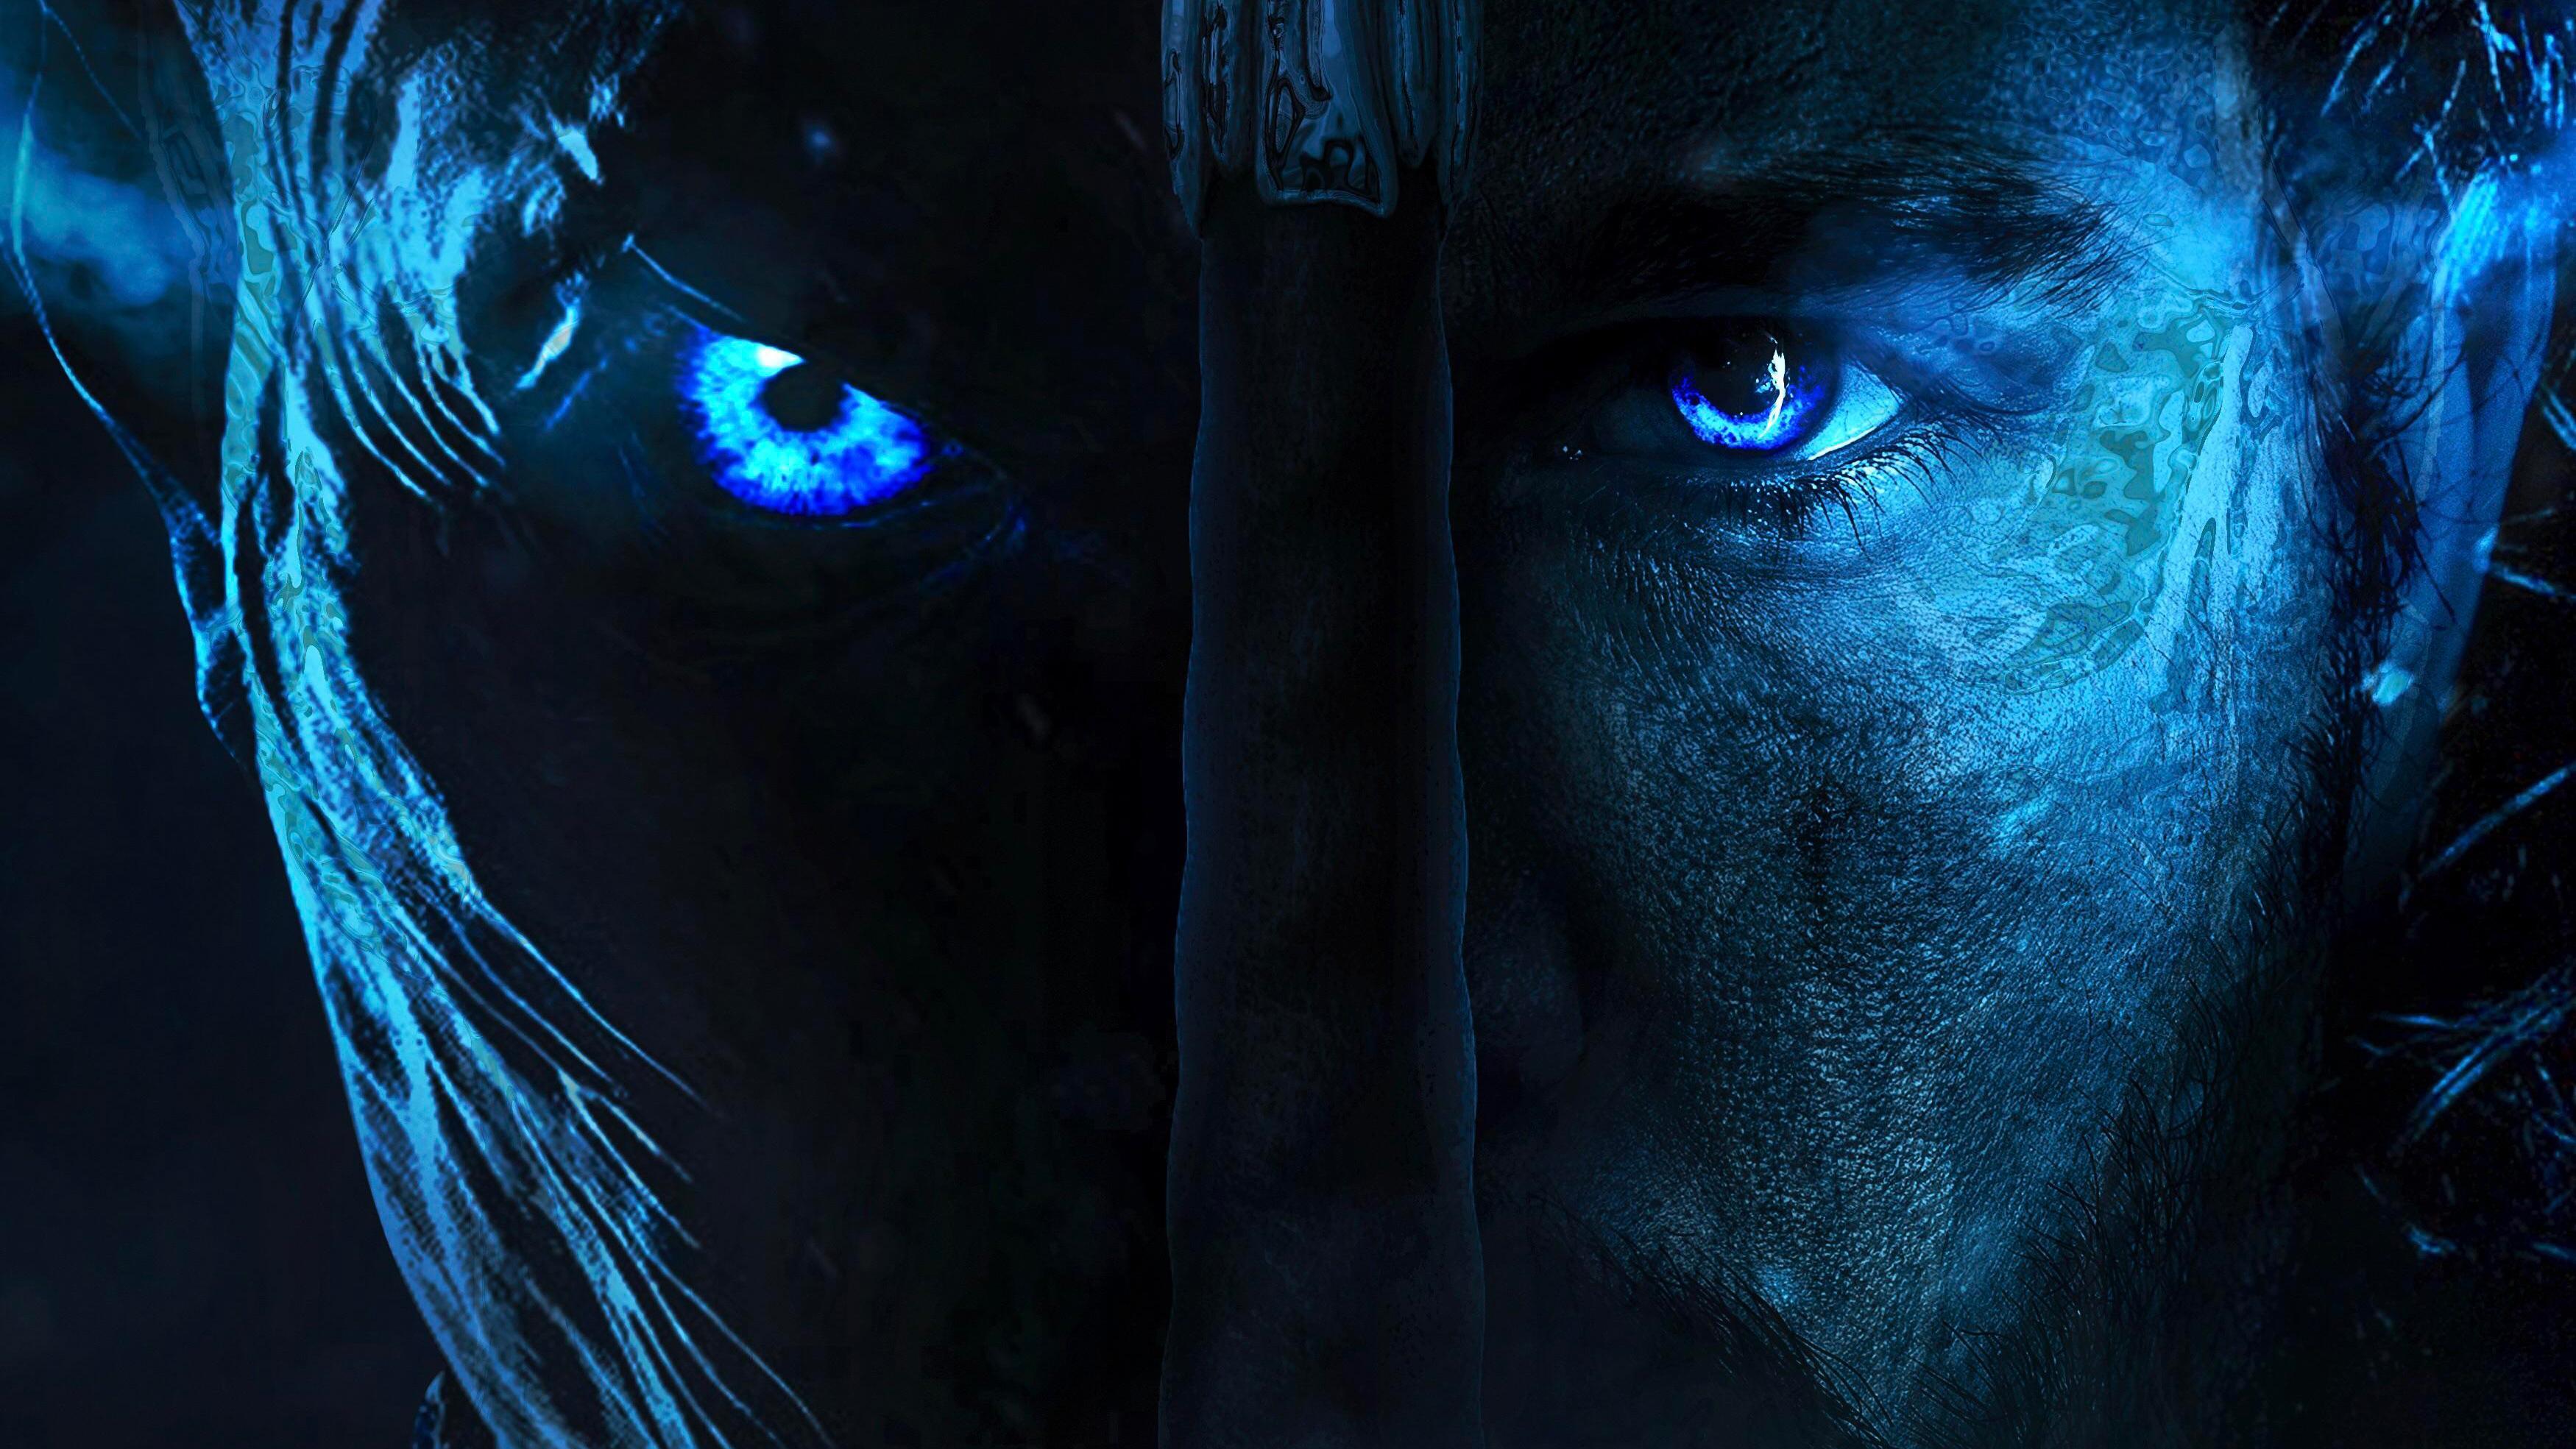 Game Of Thrones Season 8 2019, HD Tv Shows, 4k Wallpapers, Image